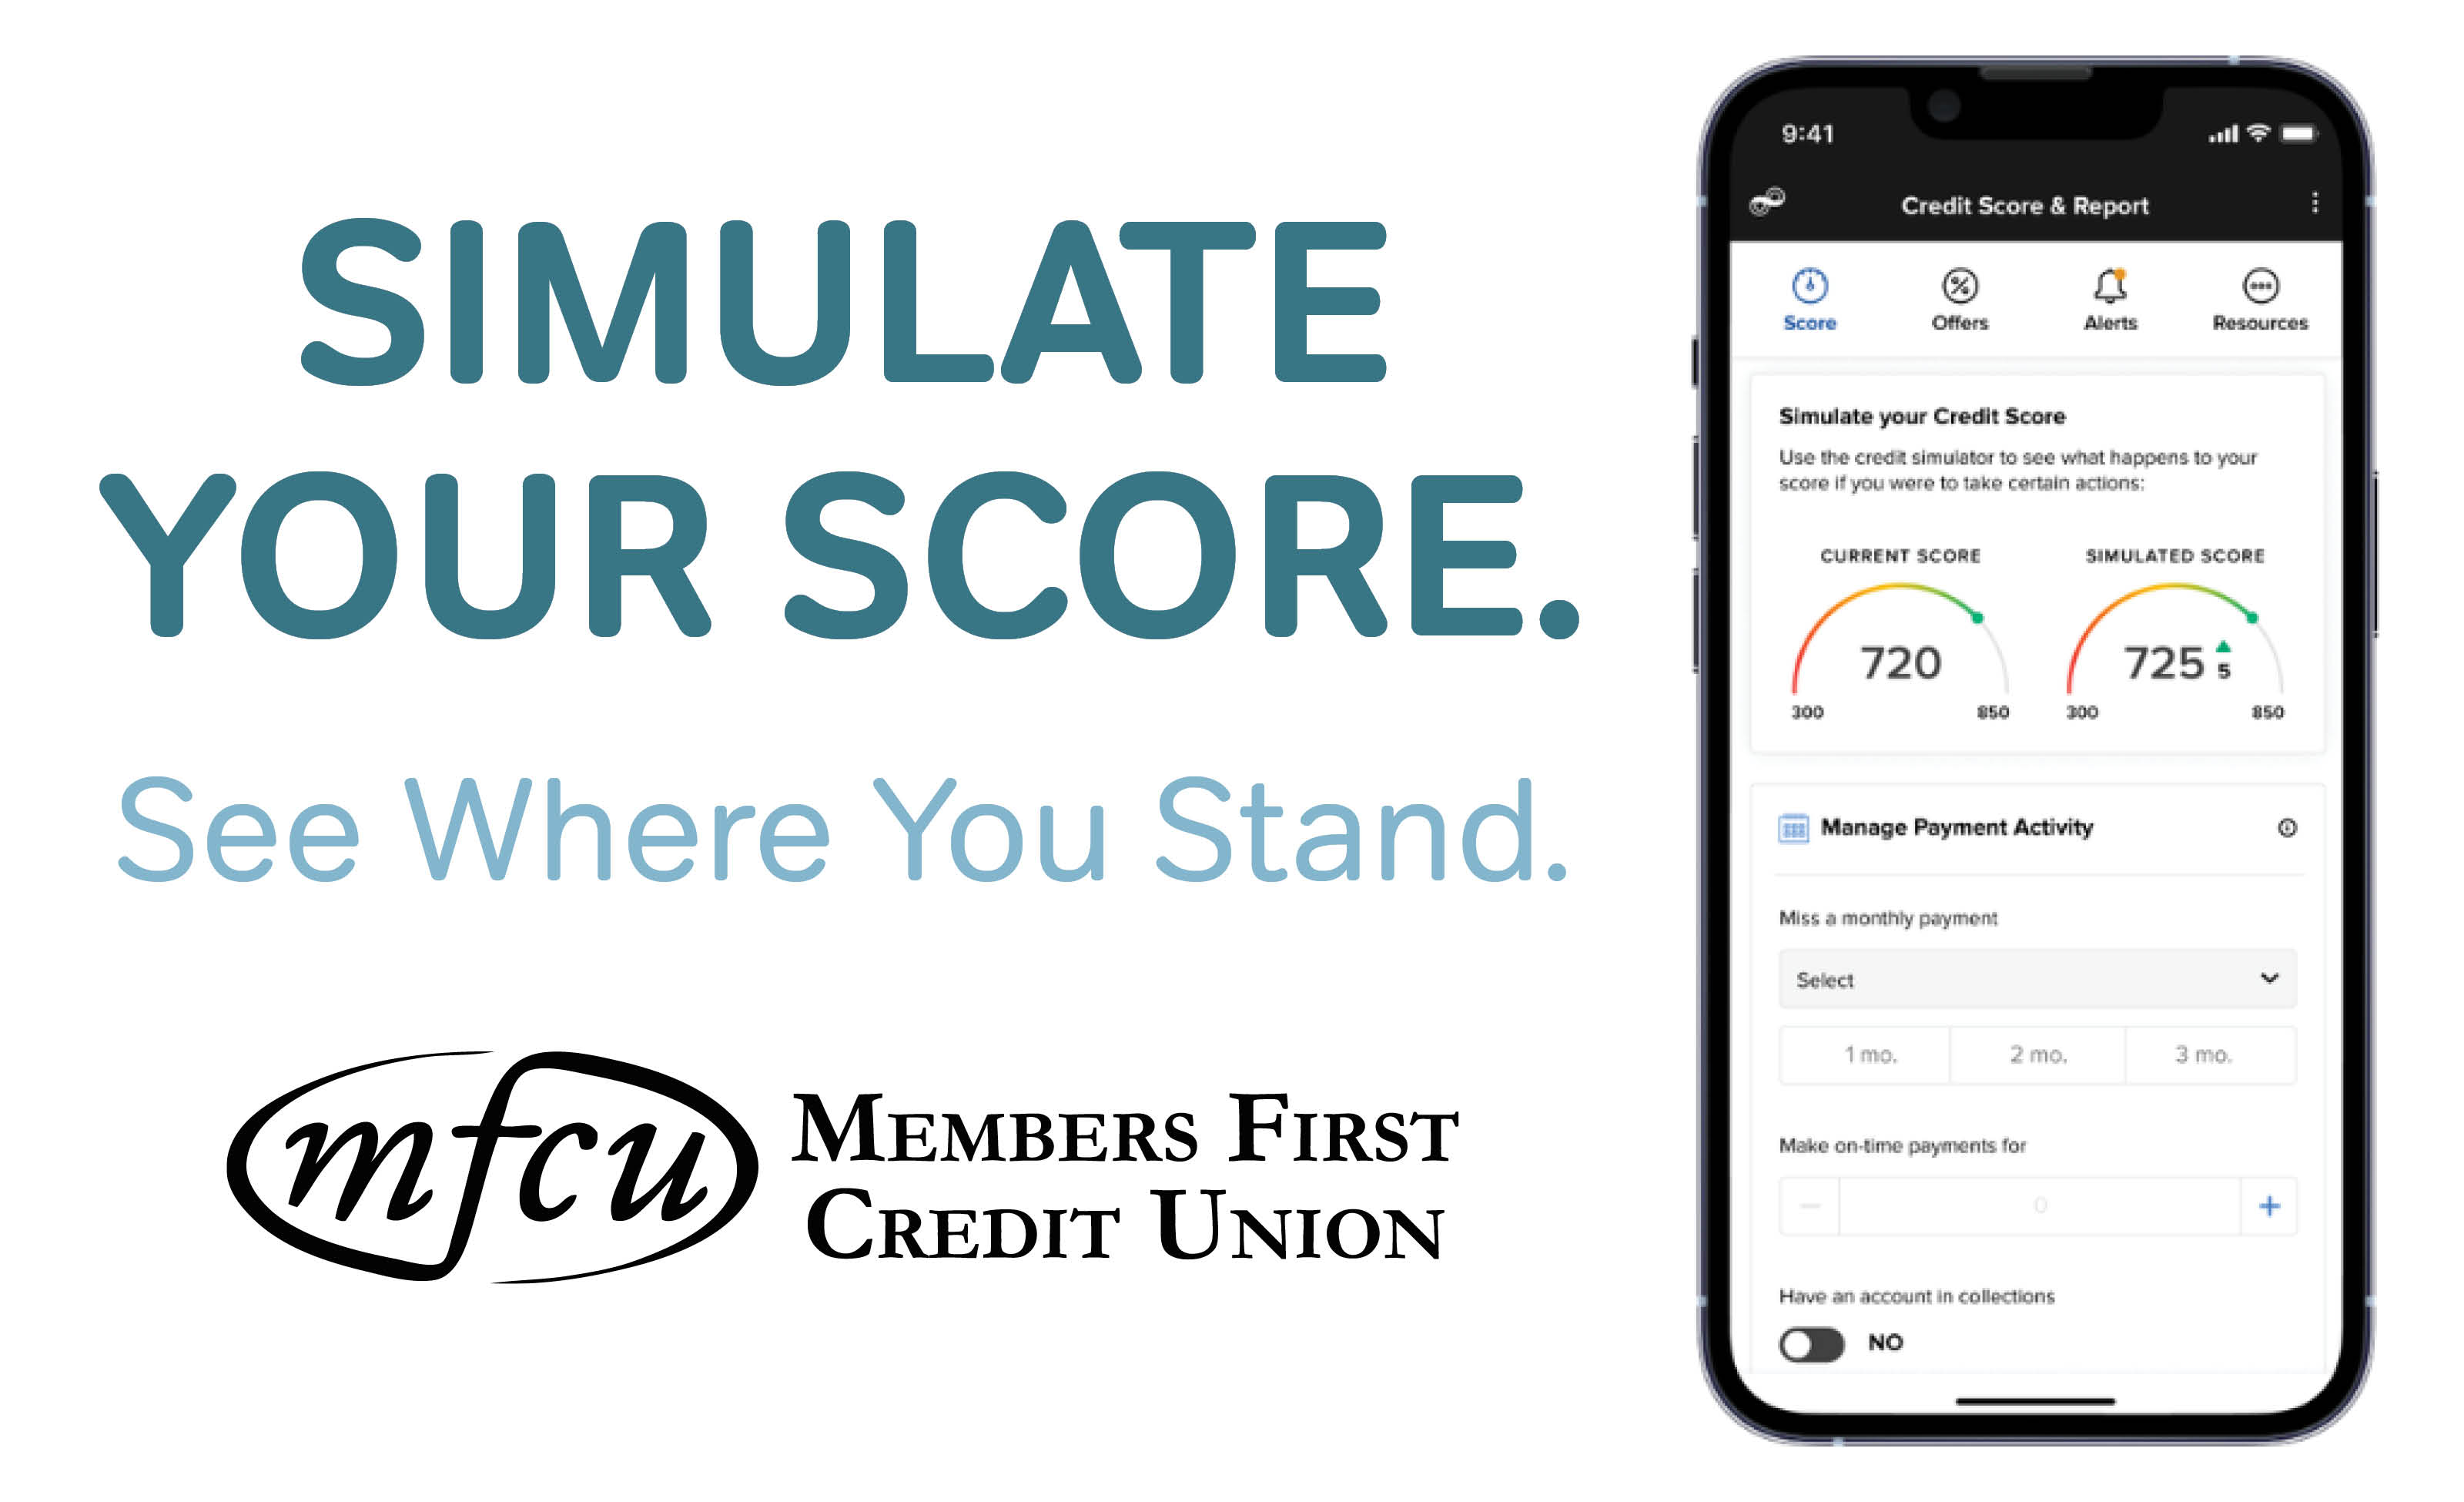 Simulate Your Credit Score and See Where You Stand.